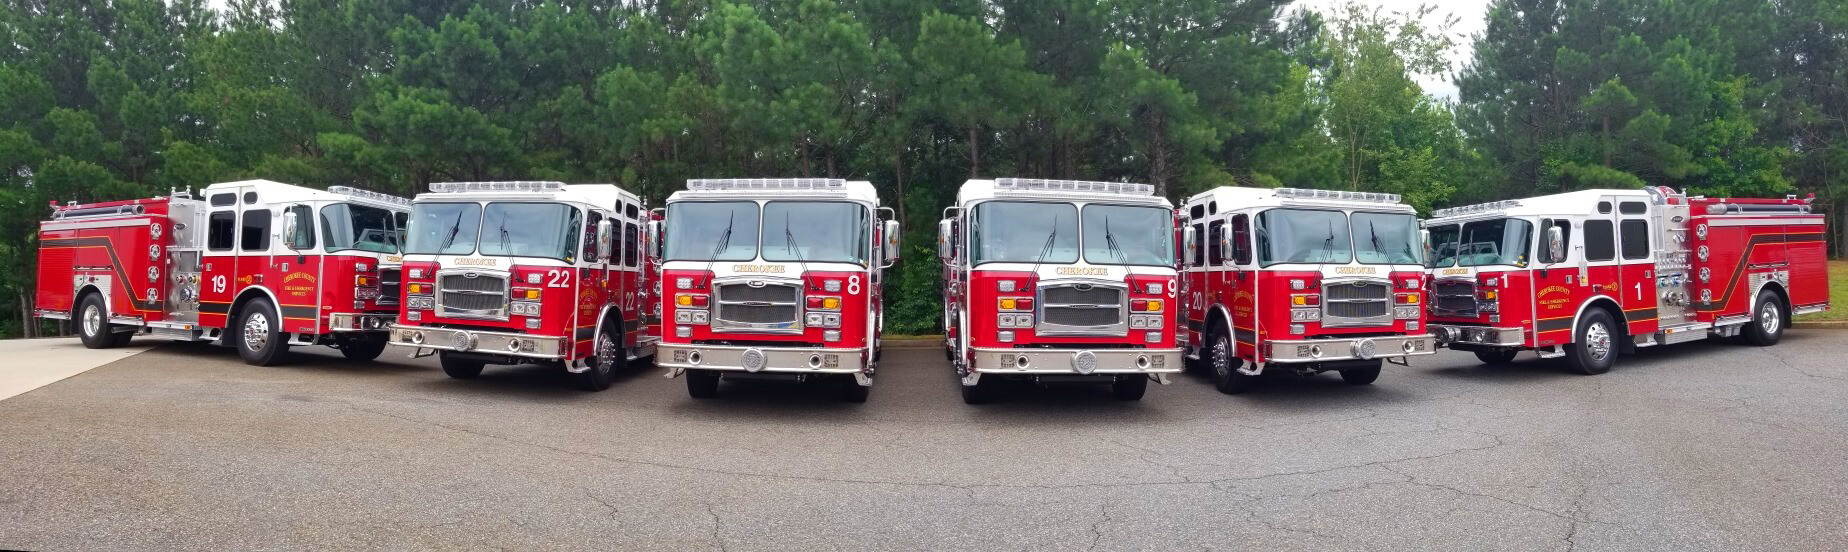 E-One Pumper fire trucks lined up in Cherokee County